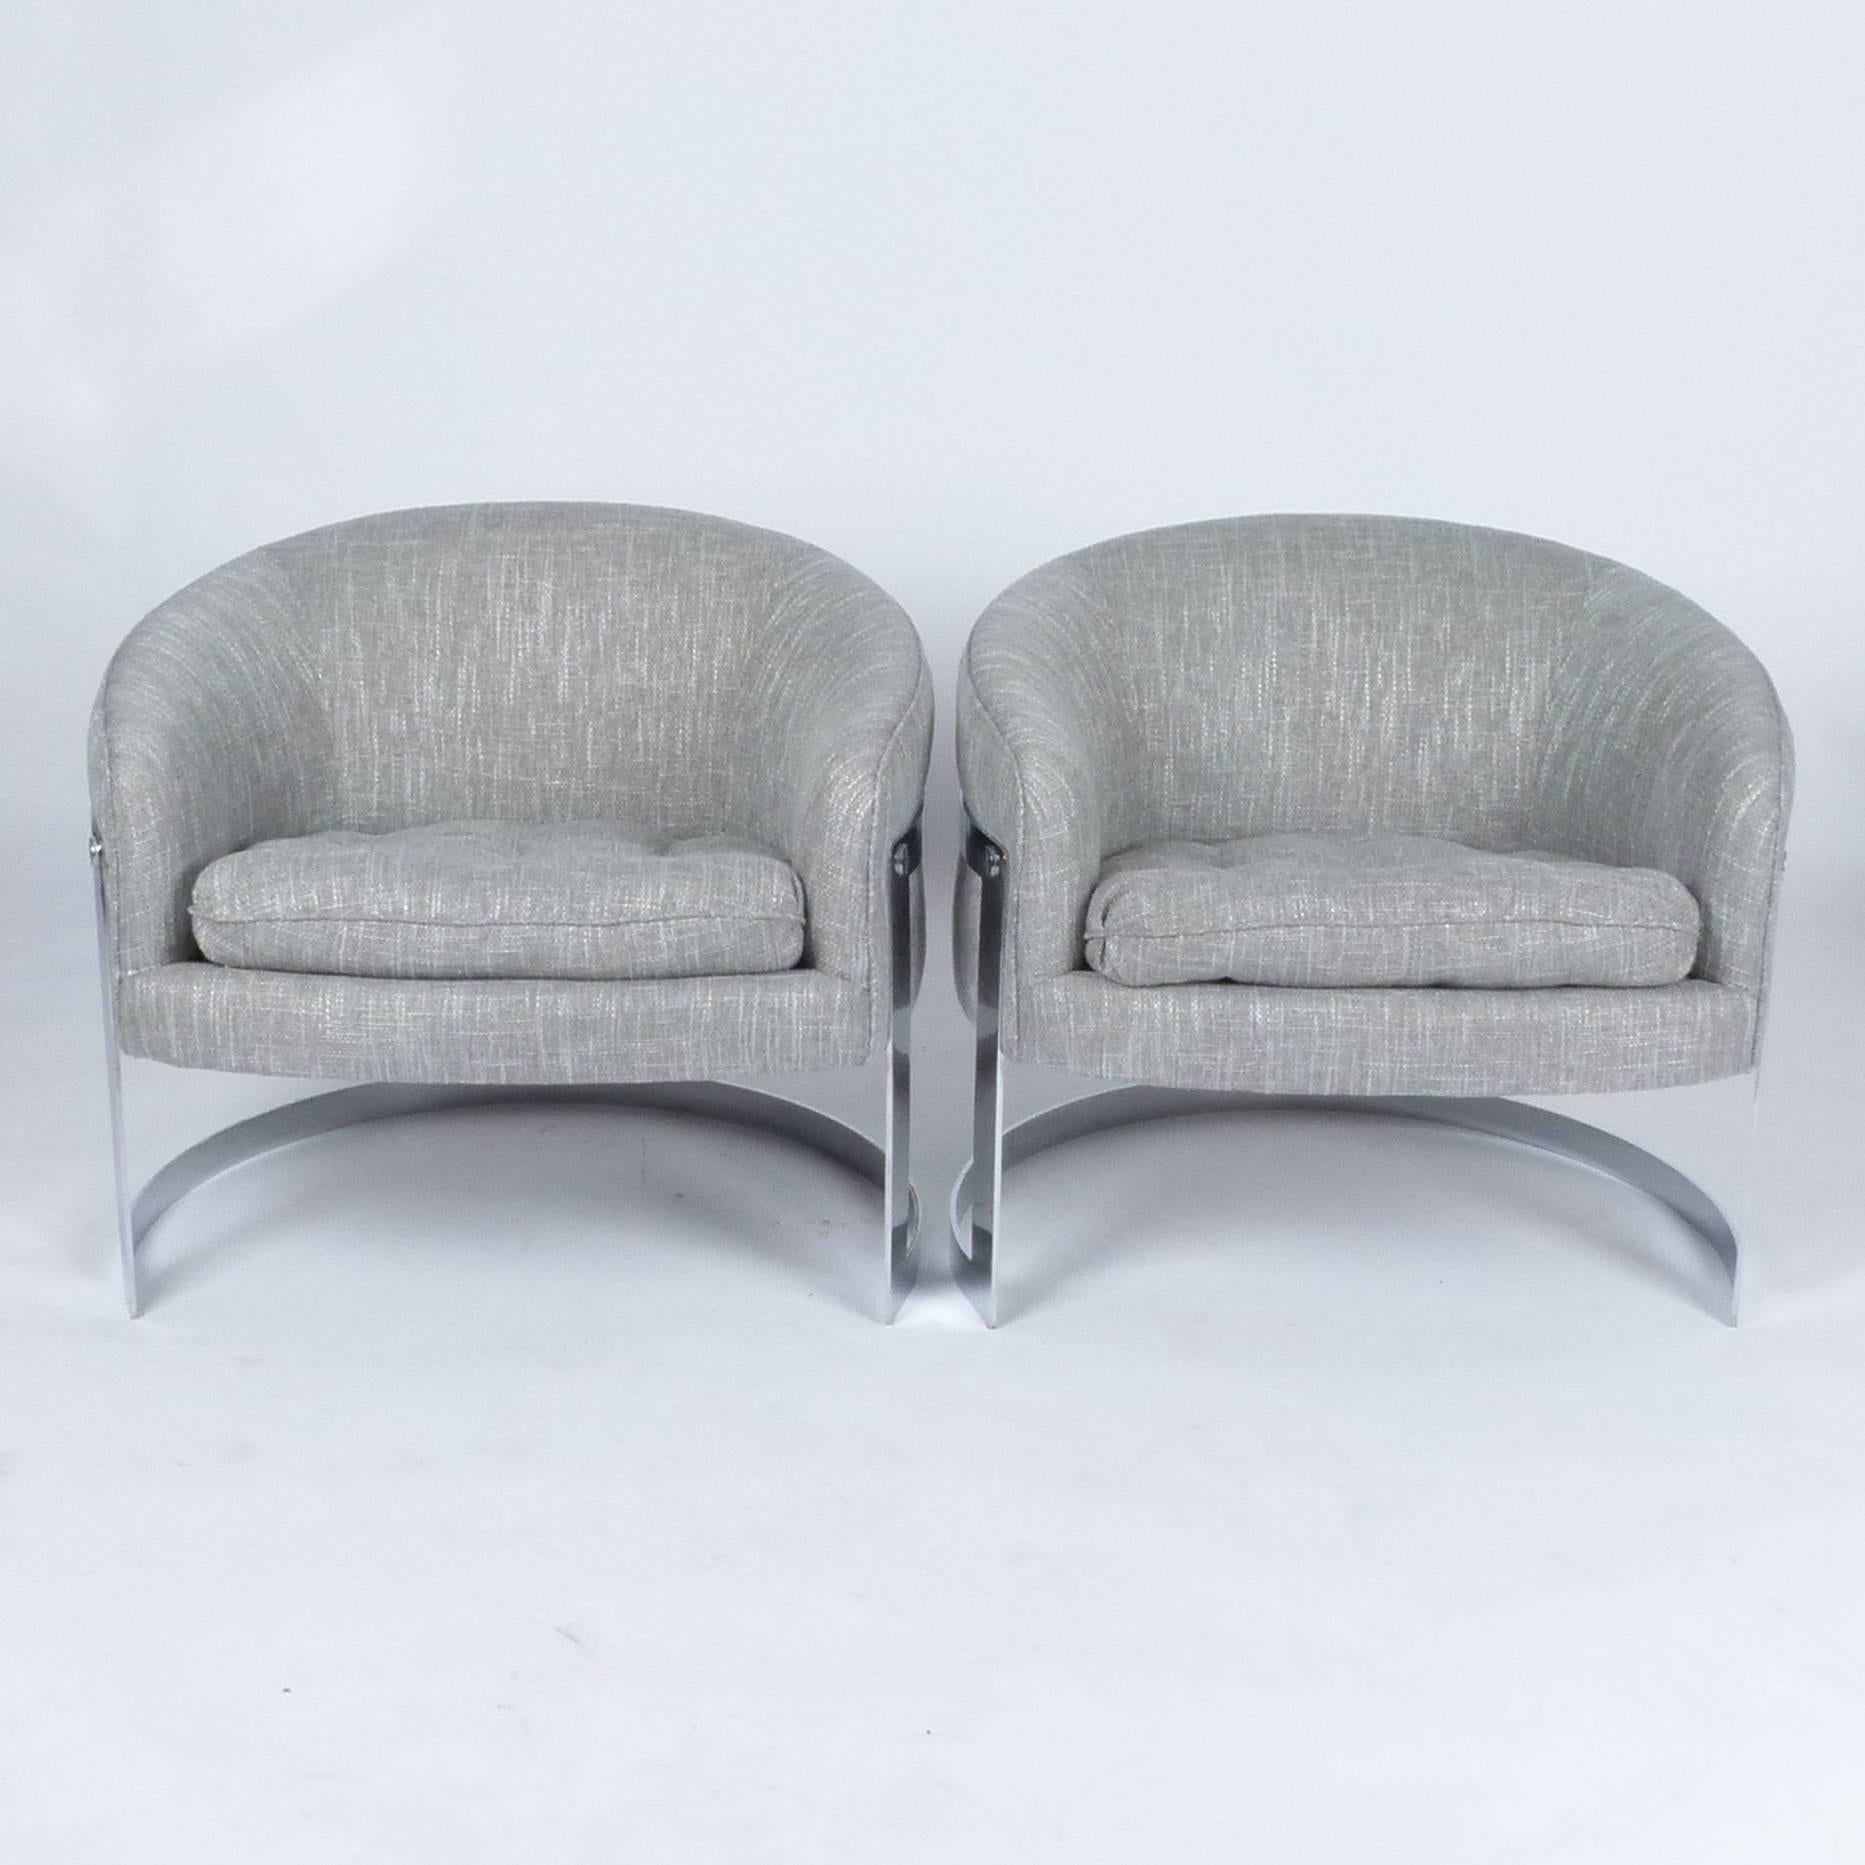 Pair of chrome frame barrel back lounge chairs by Milo Baughman for Thayer Coggin. Completely restored with new upholstery and in excellent condition.